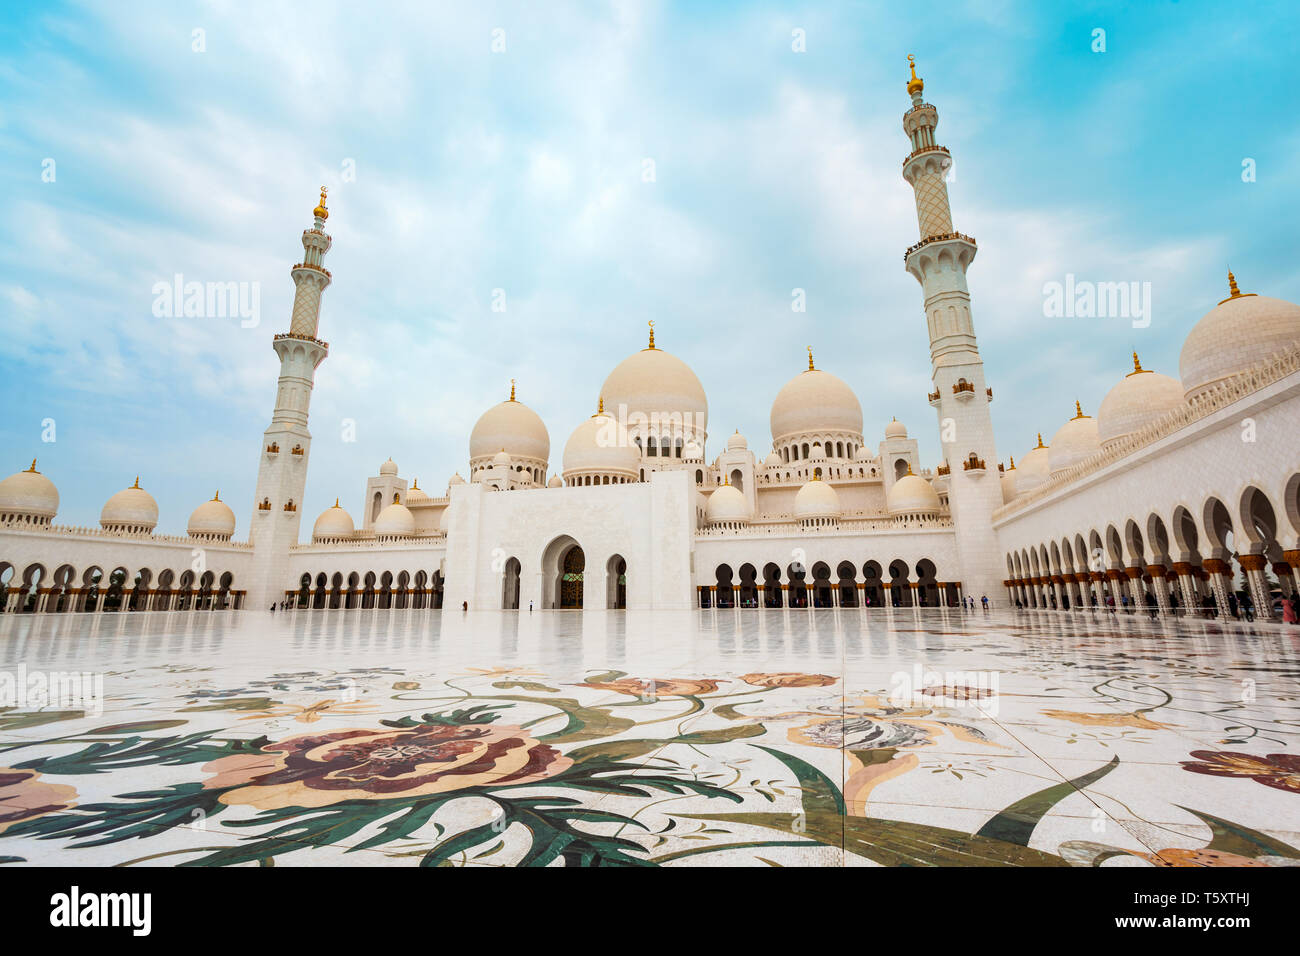 Sheikh Zayed Grand Mosque is the largest mosque of UAE, located in Abu Dhabi the capital city of the United Arab Emirates Stock Photo